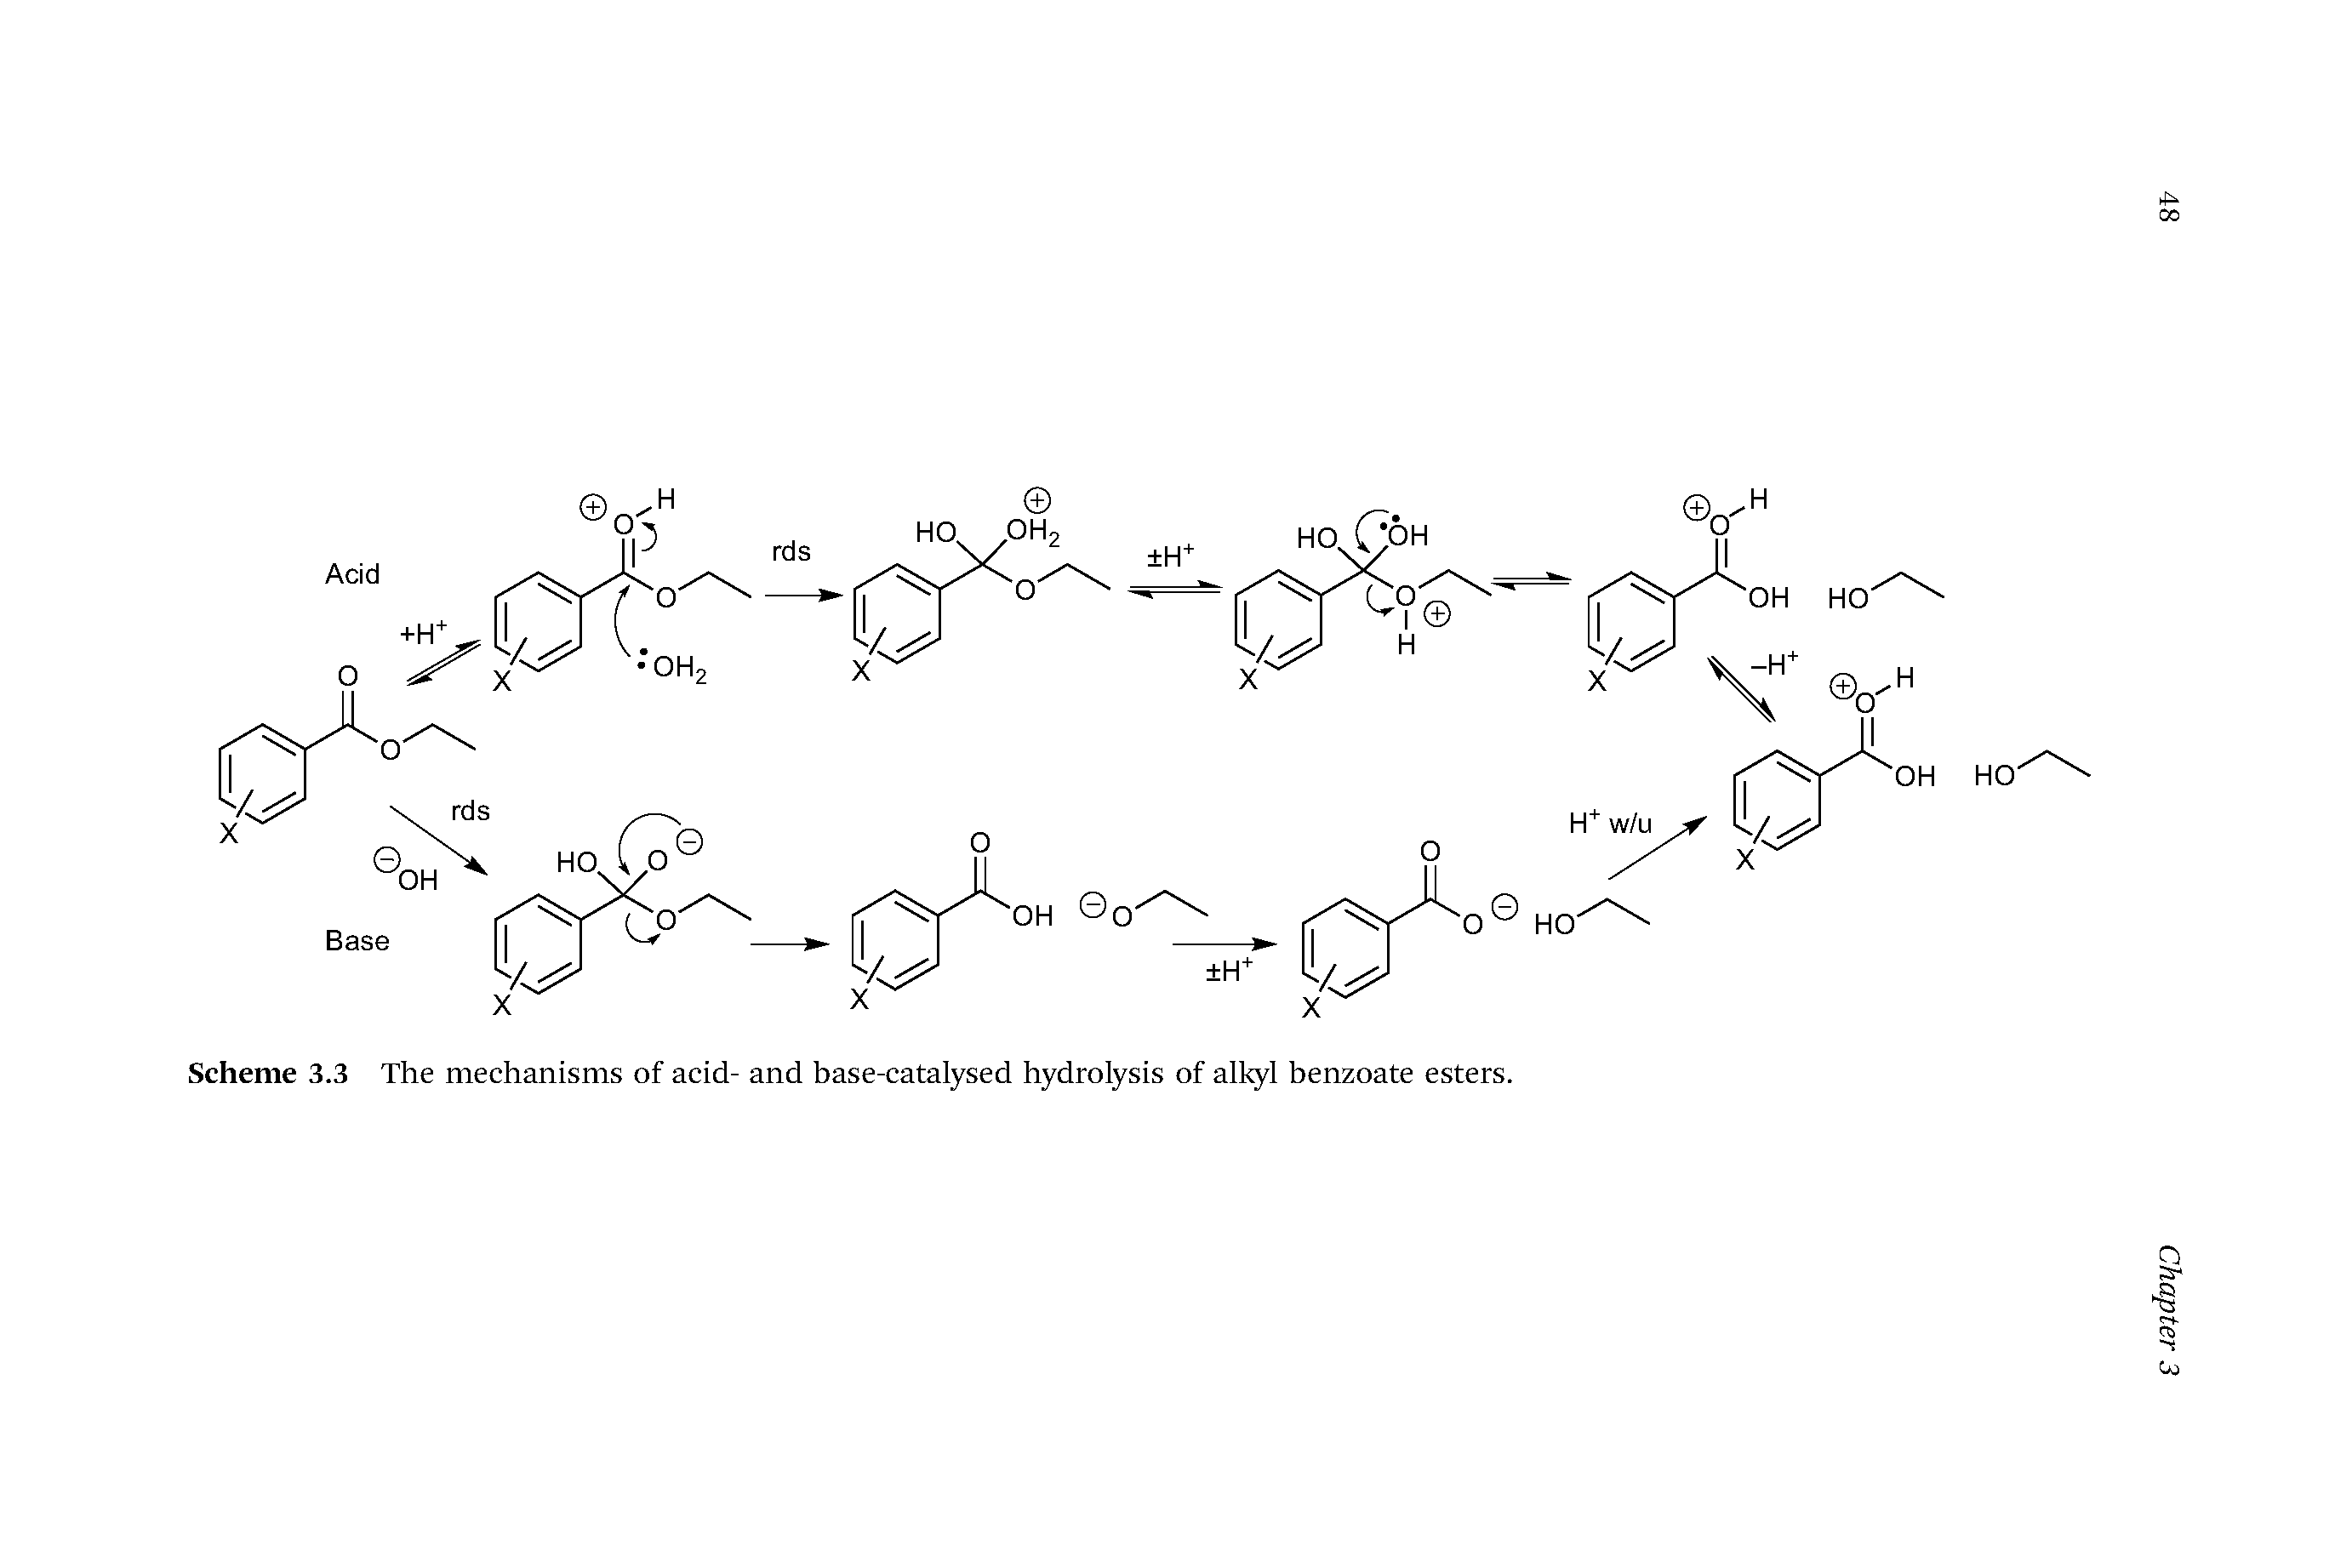 Scheme 3.3 The mechanisms of acid- and base-catalysed hydrolysis of alkyl benzoate esters.